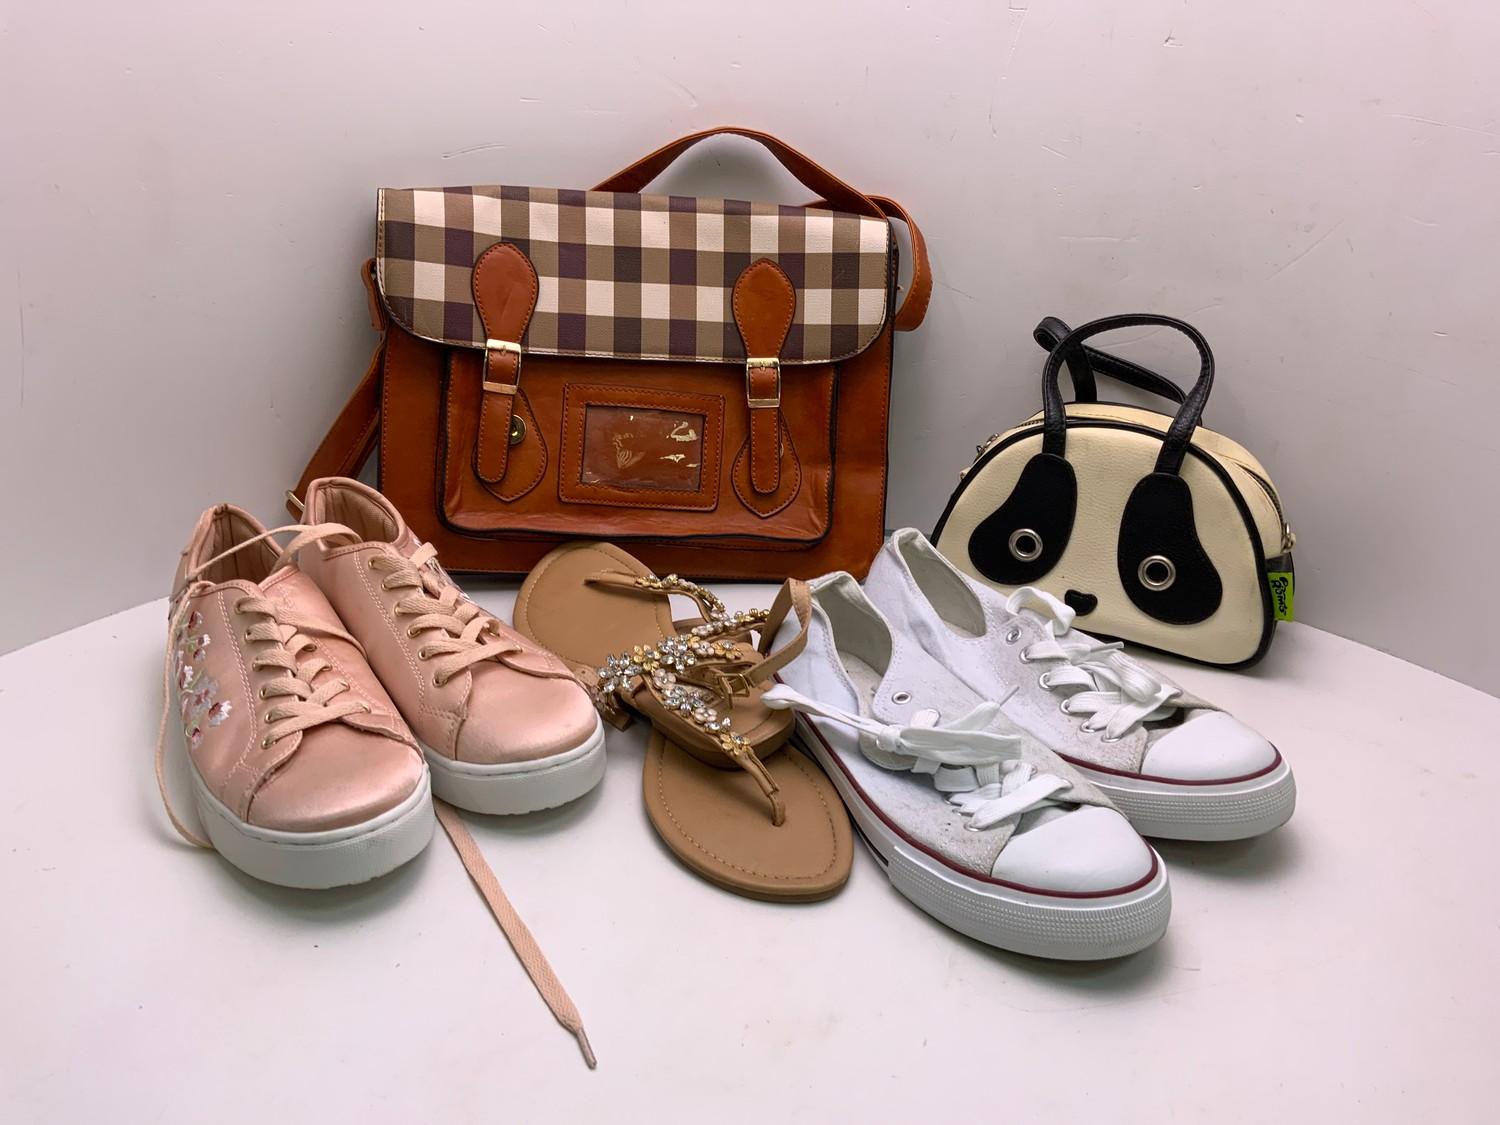 Handbags and Shoes